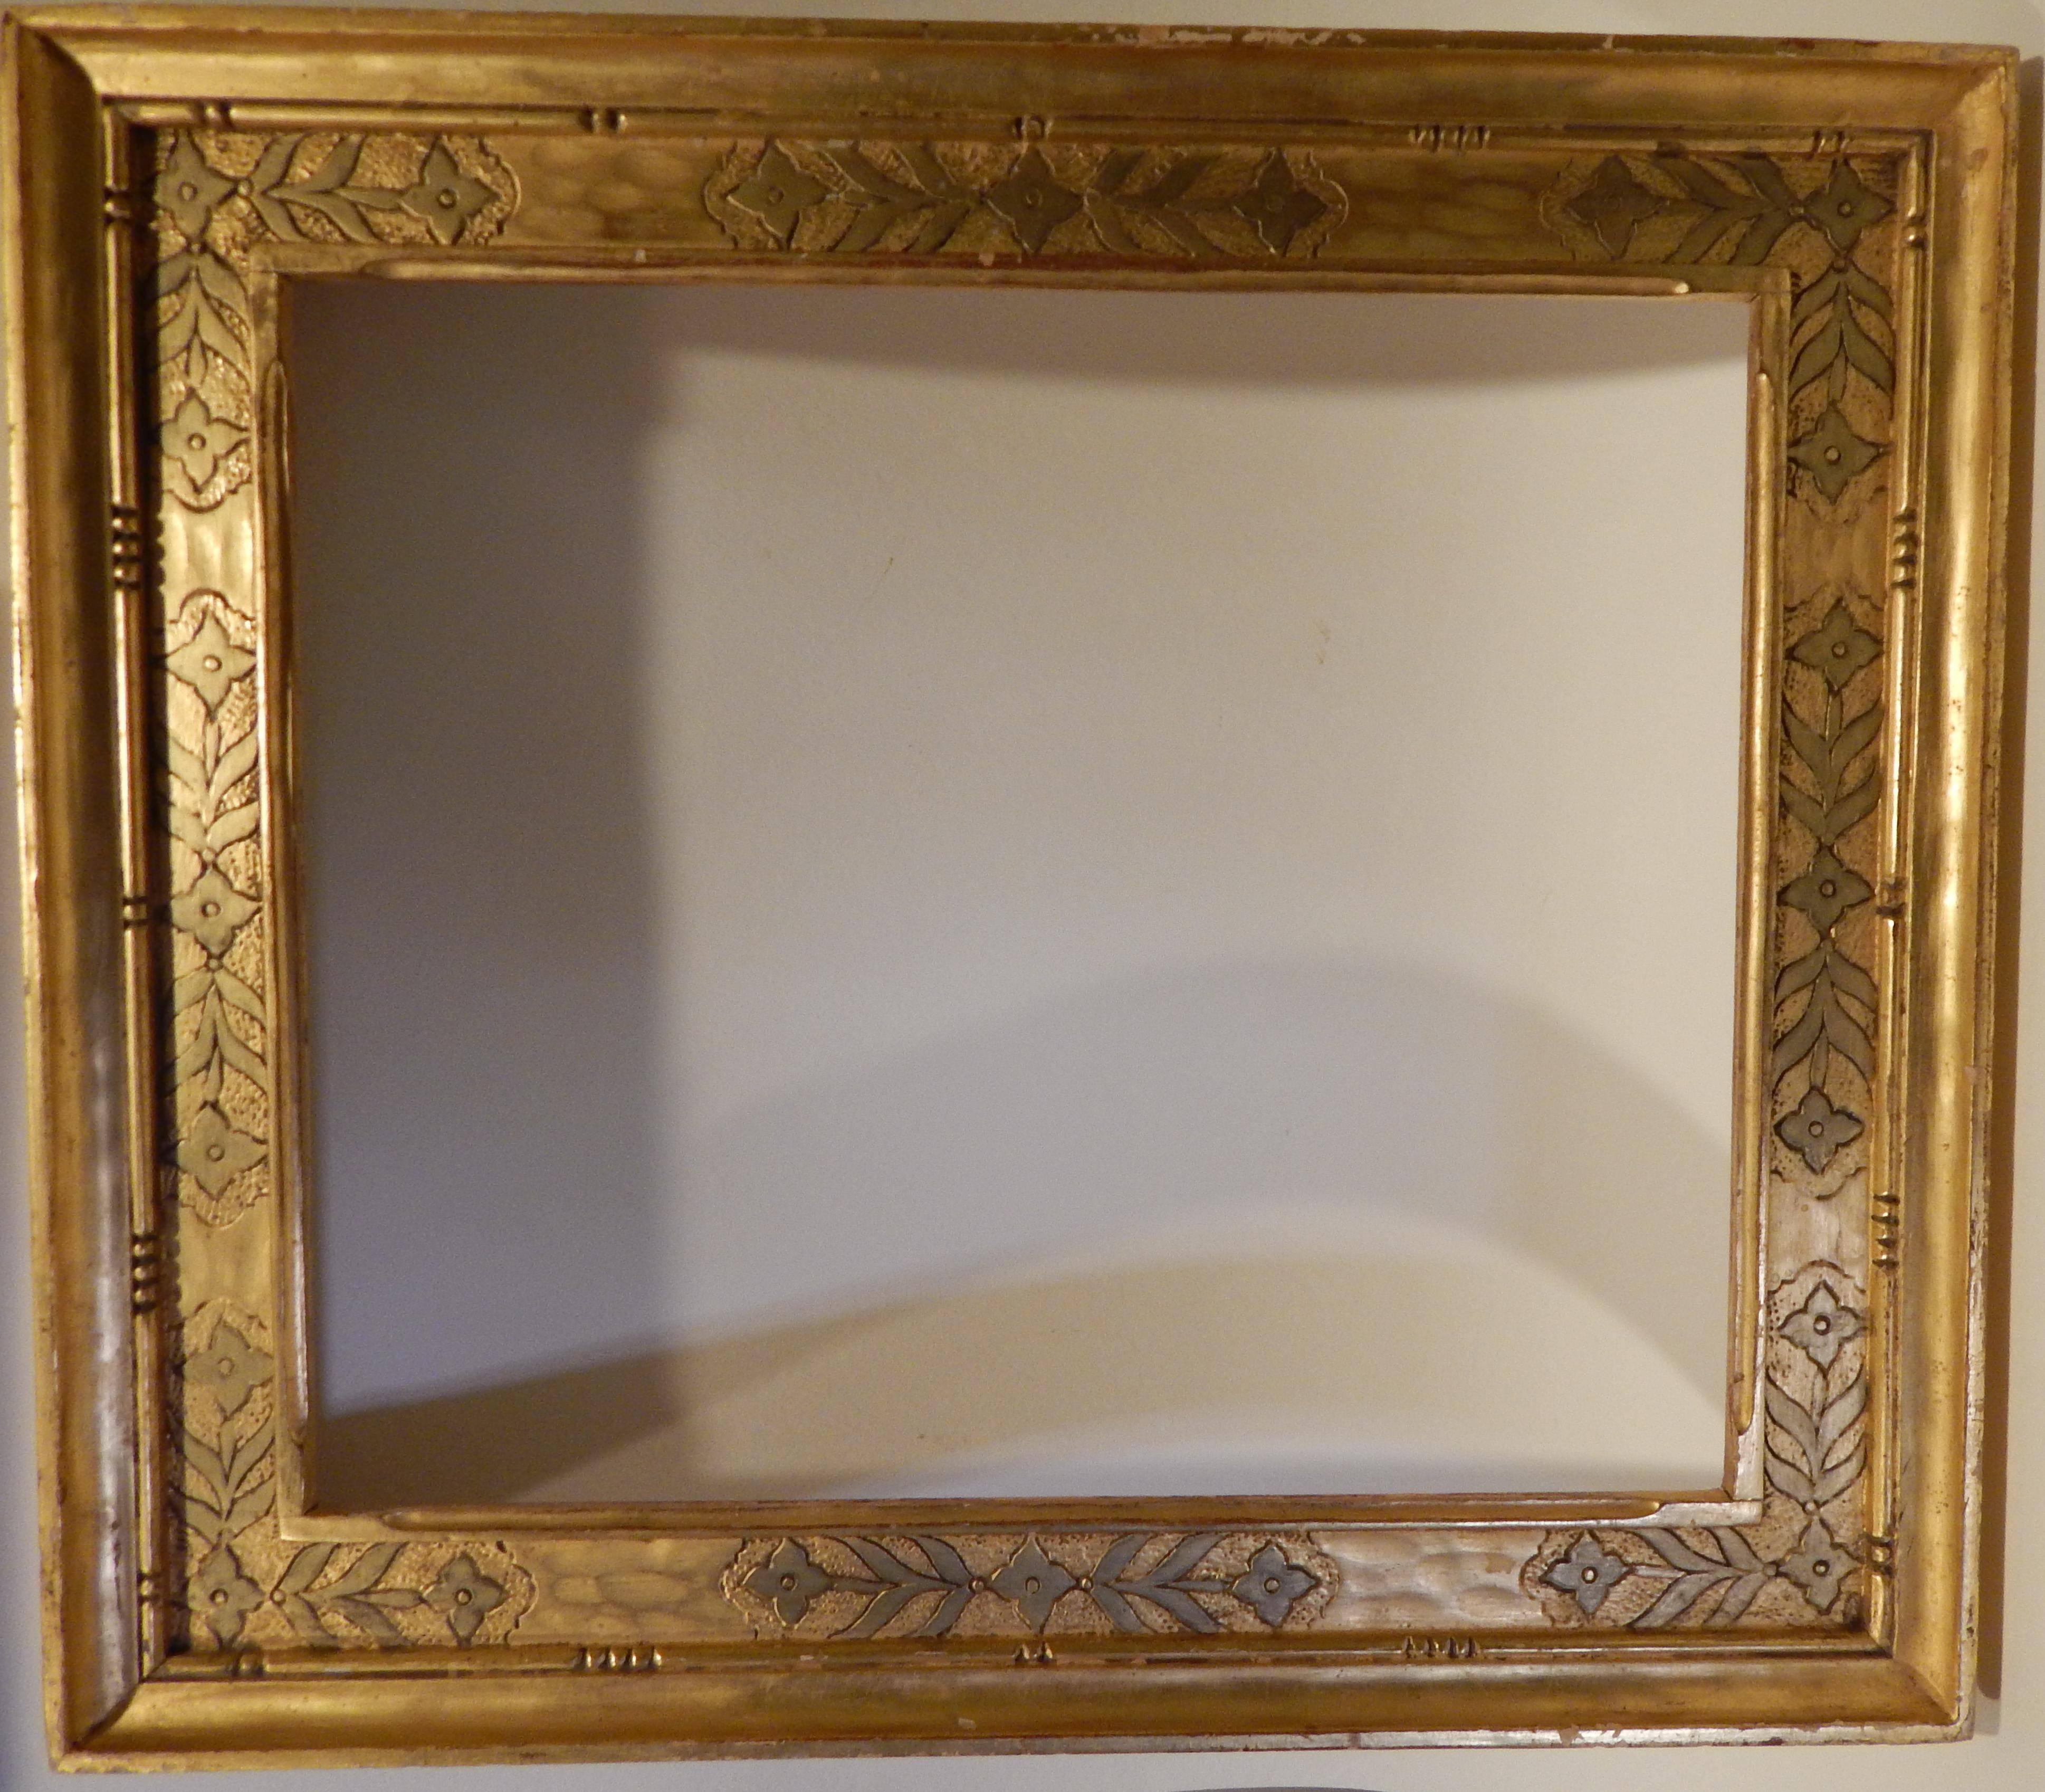 Hand-carved vintage frame by well-known painter and framer,
Ben Badura (1896-1986).
Wonderfully decorated with a floral motif using extensive
sgraffitto and punch work.
A very good example by one of New Hope’s best craftsman,
circa